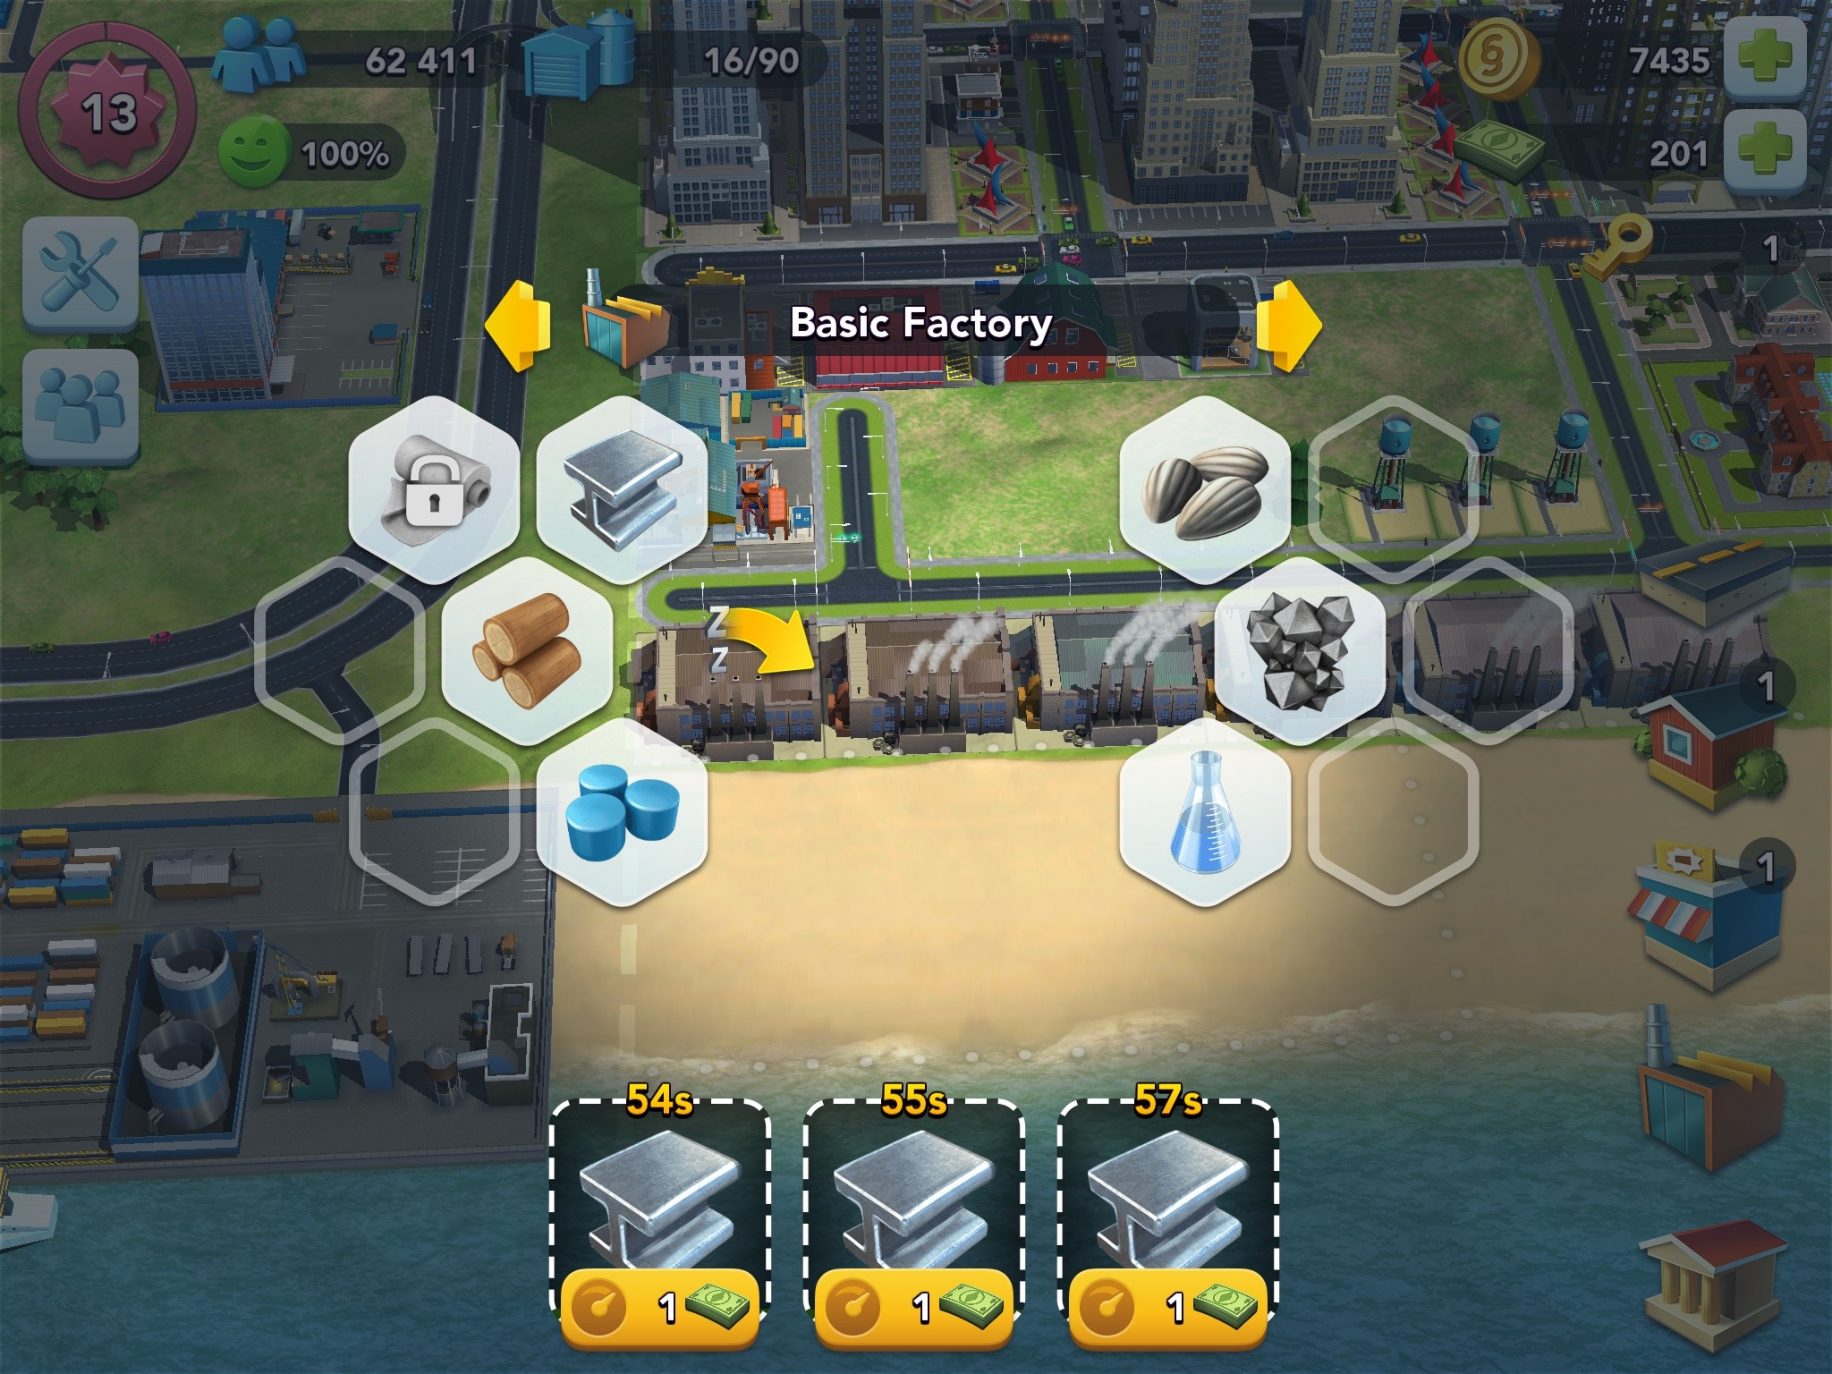 simcity buildit layout tips